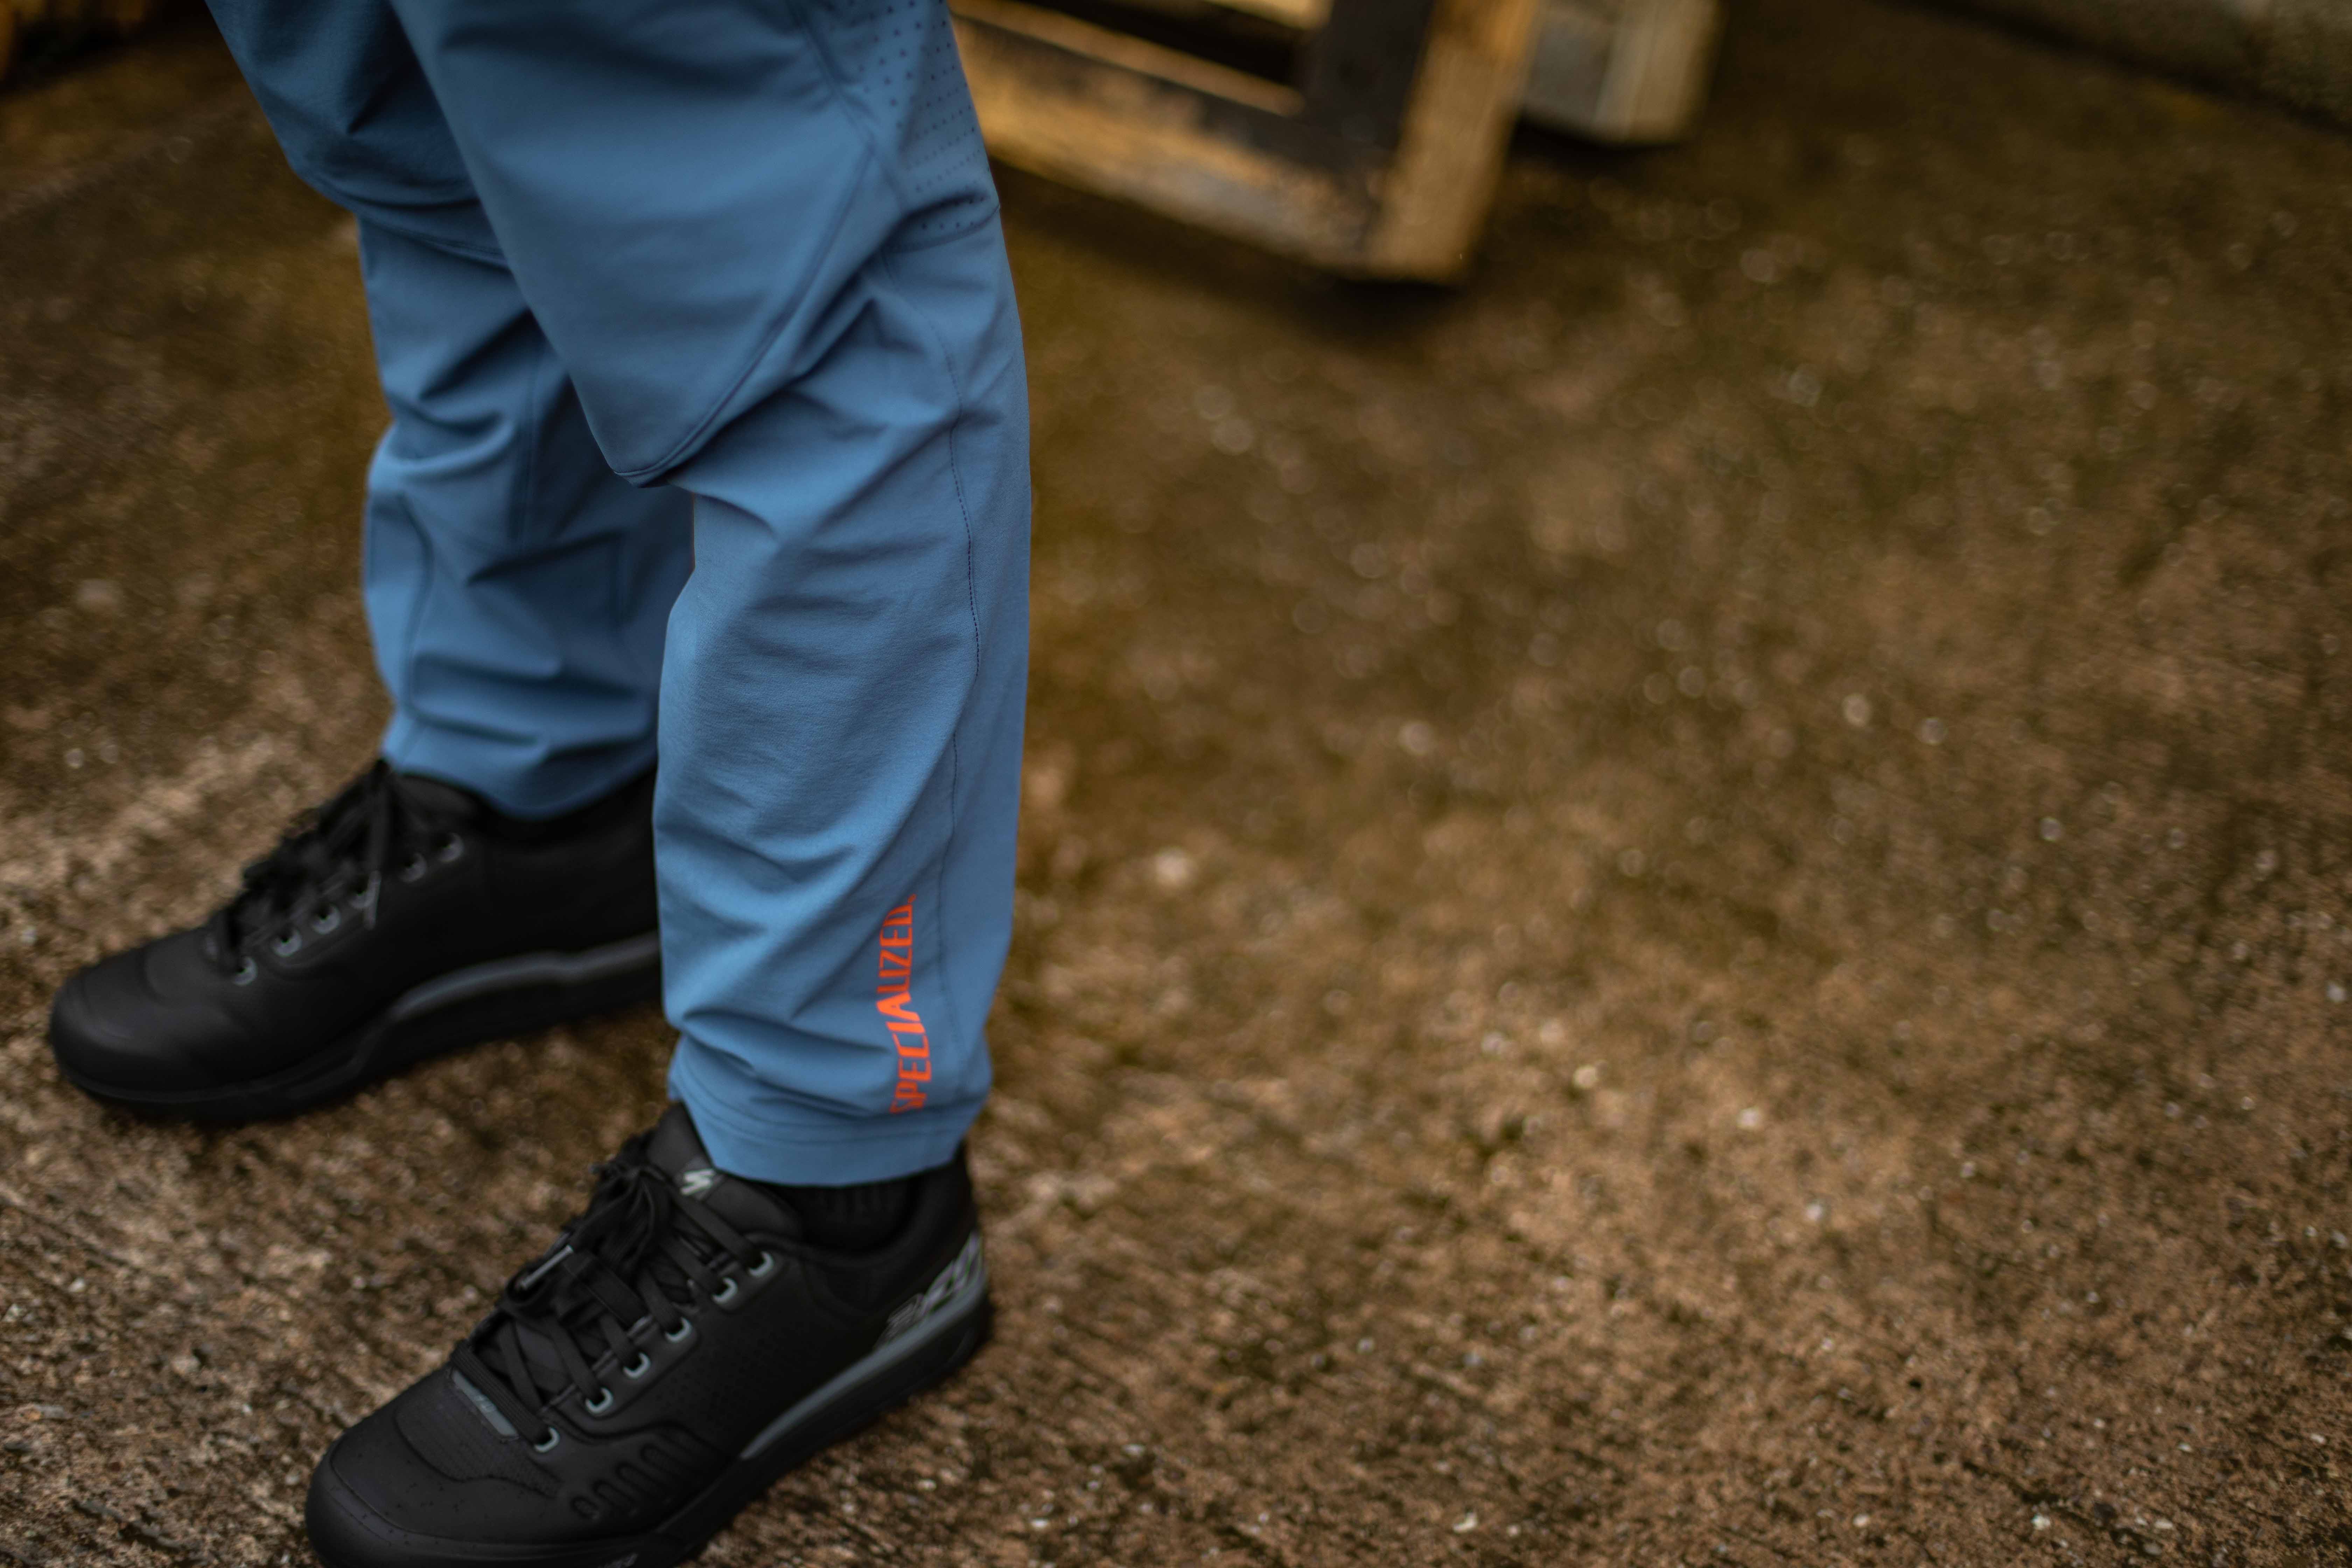 specialized demo pro pants 2019